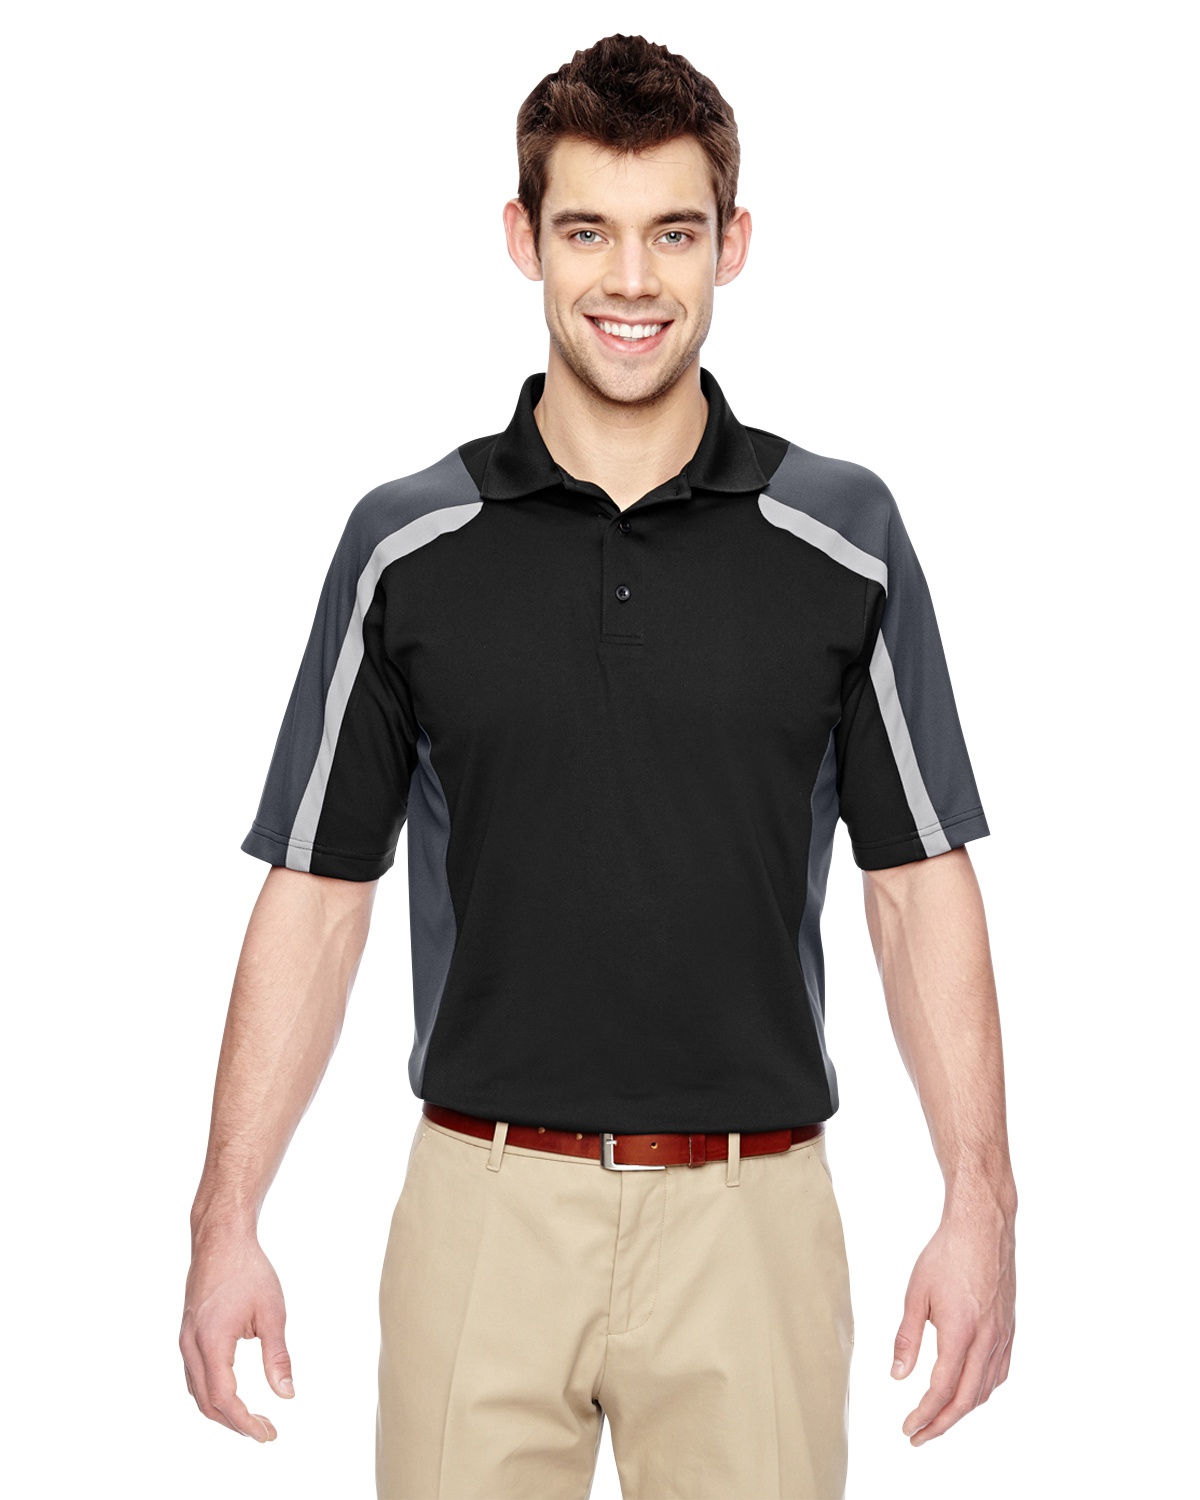 'Ash City - Extreme 85119 Men's Eperformance Strike Colorblock Snag Protection Polo'